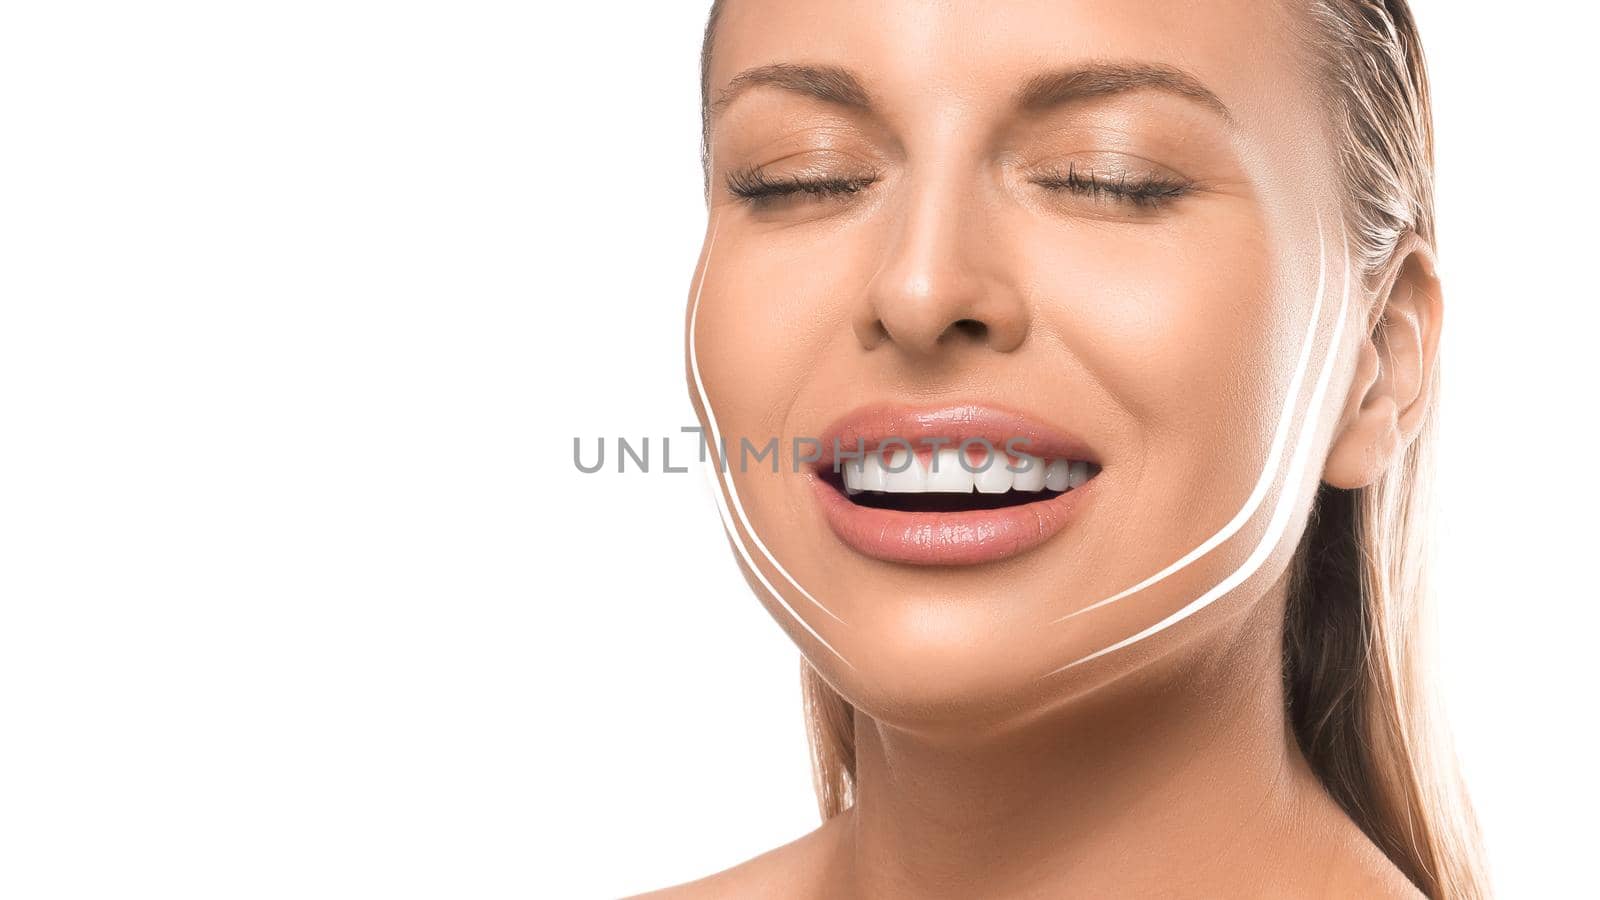 Portrait of a smiling woman with face-lifting lines on the face. Photo on white background. Face lifting concept.